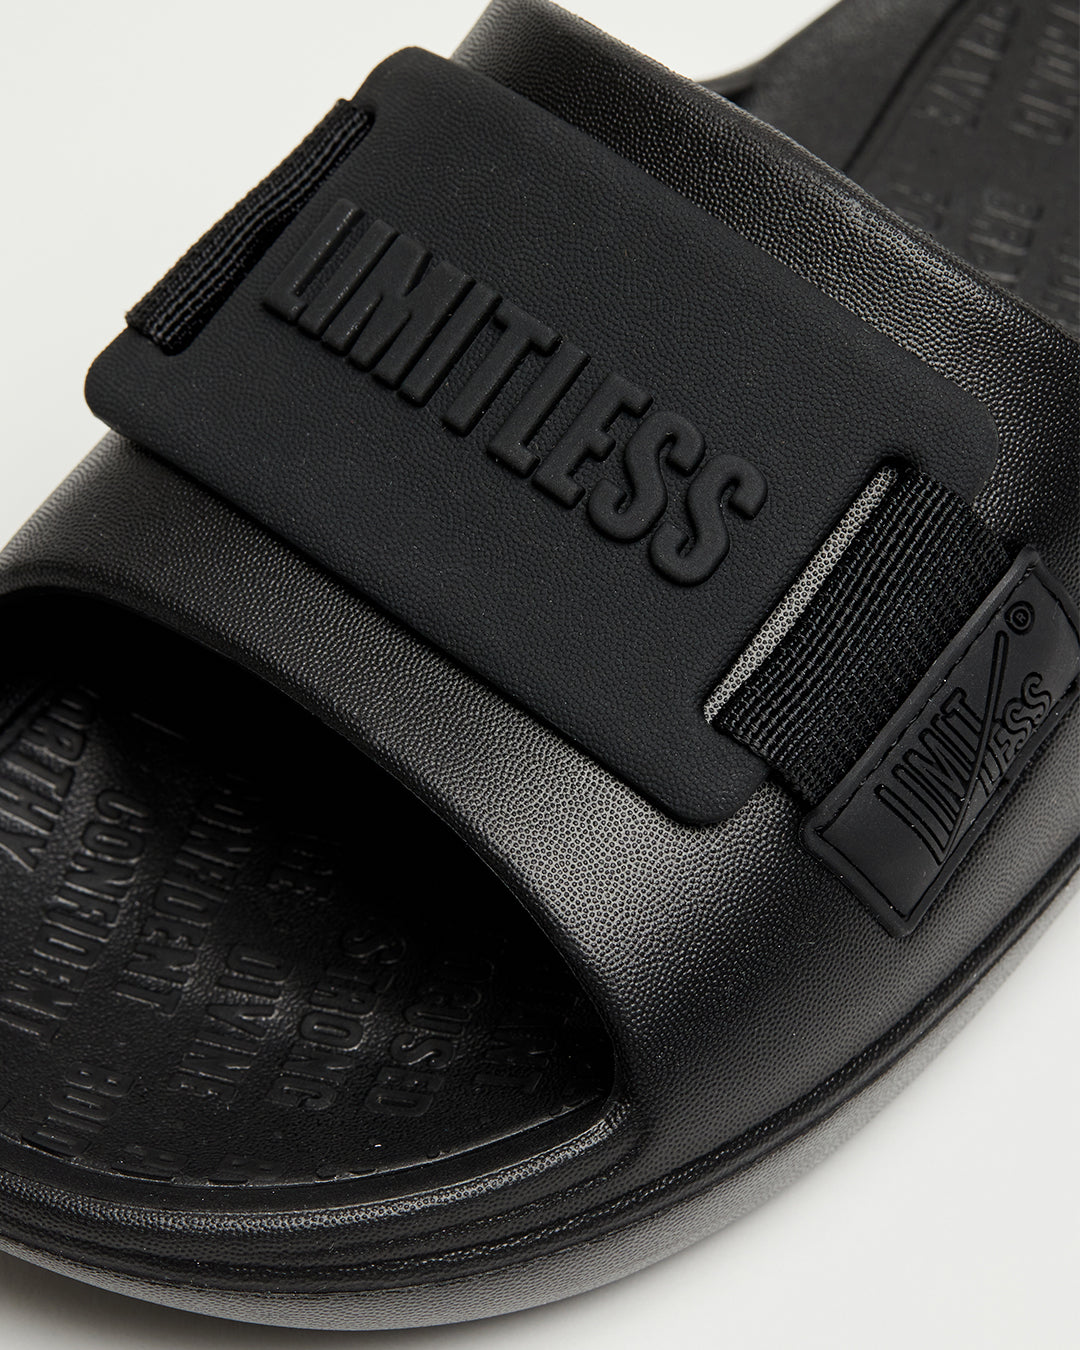 LIMITLESS SLIDES™ WITH ESSENTIAL TIBAH™ QUAD - AMERICANS SOCCER CLUB EDITION